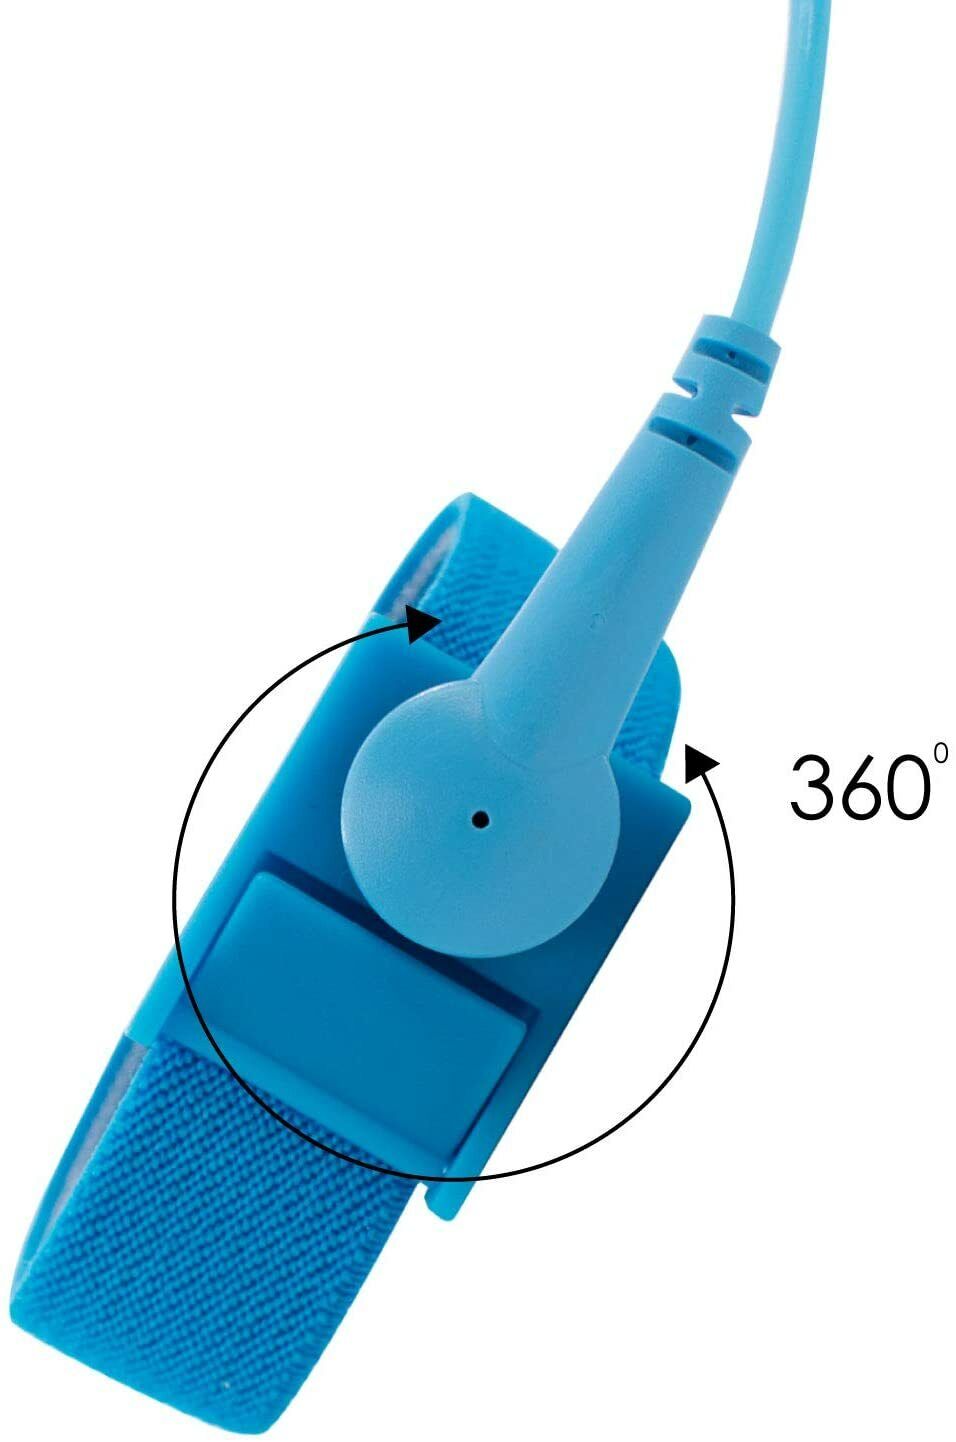 10X Anti-Static Wrist Band ESD Grounding Strap Prevents Static Build Up Blue Unbranded Does Not Apply - фотография #6